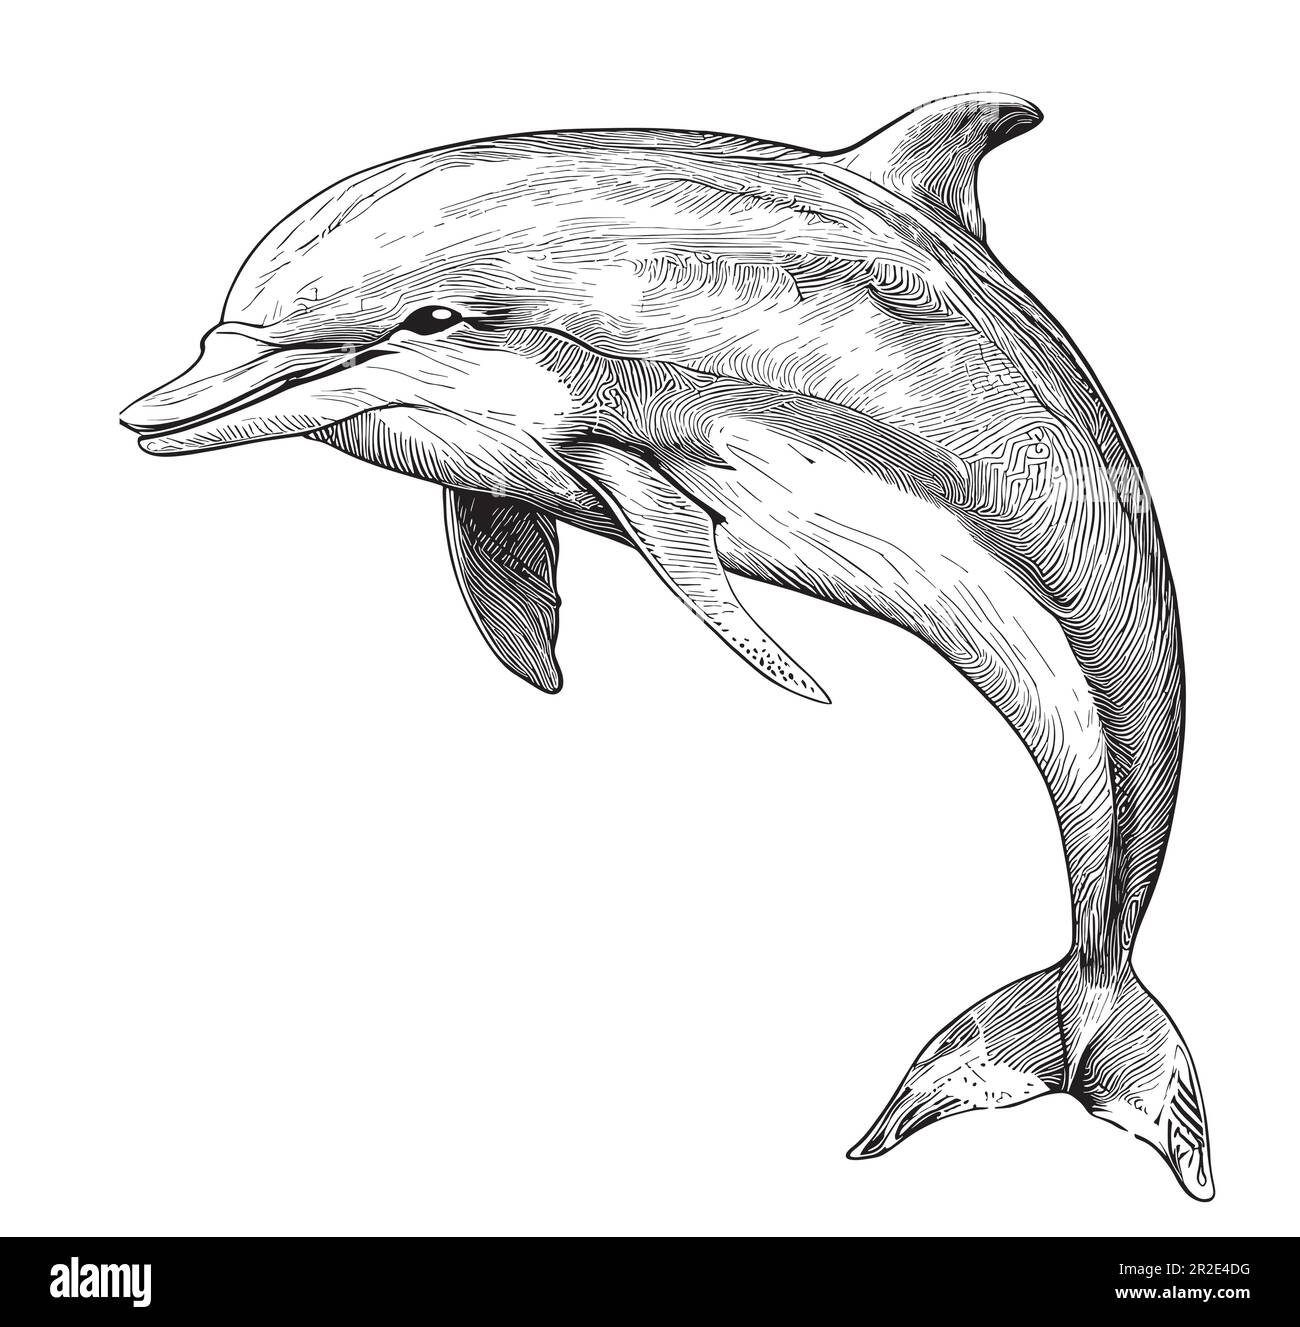 pencil #drawing #art #dolphin | Dolphin drawing, Dolphin art, Pencil art  drawings